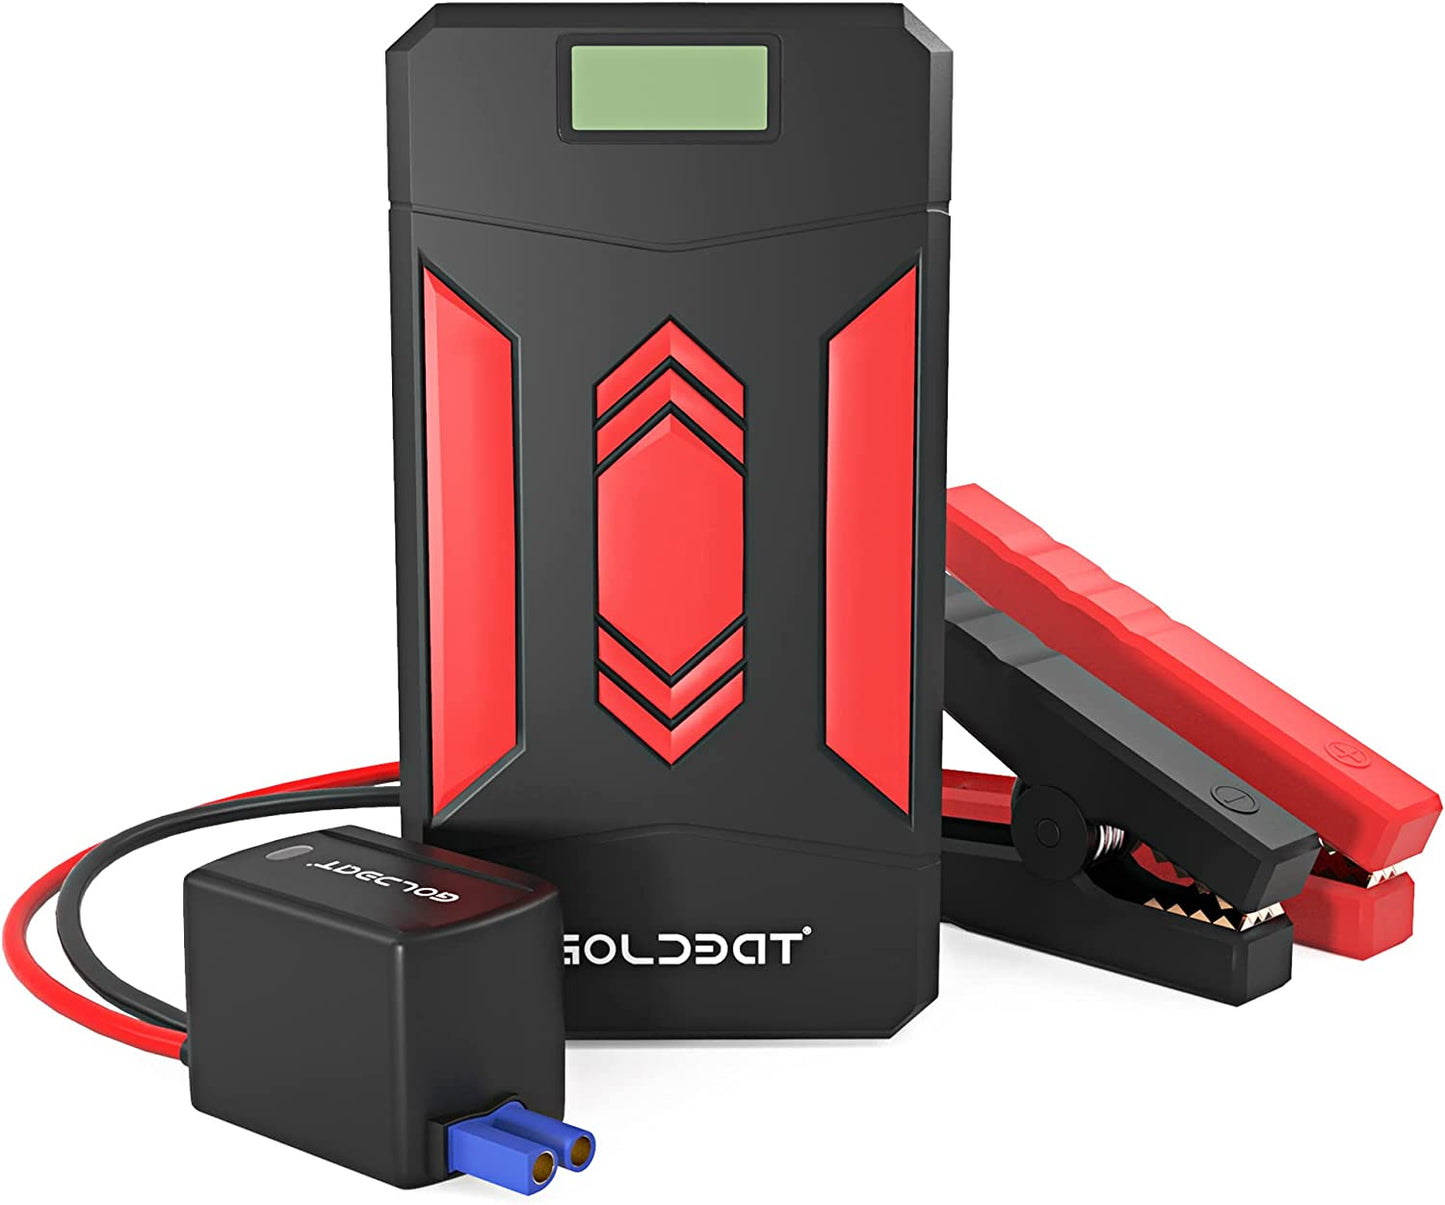 GOLDBAT 700A Peak 12V 8000mAh Car Jump Starter (Up to 4.0L Gas or 2.0L Diesel Engine) Portable Power Pack Auto Battery Booster with LED Light Gift Box Packaging (Black)